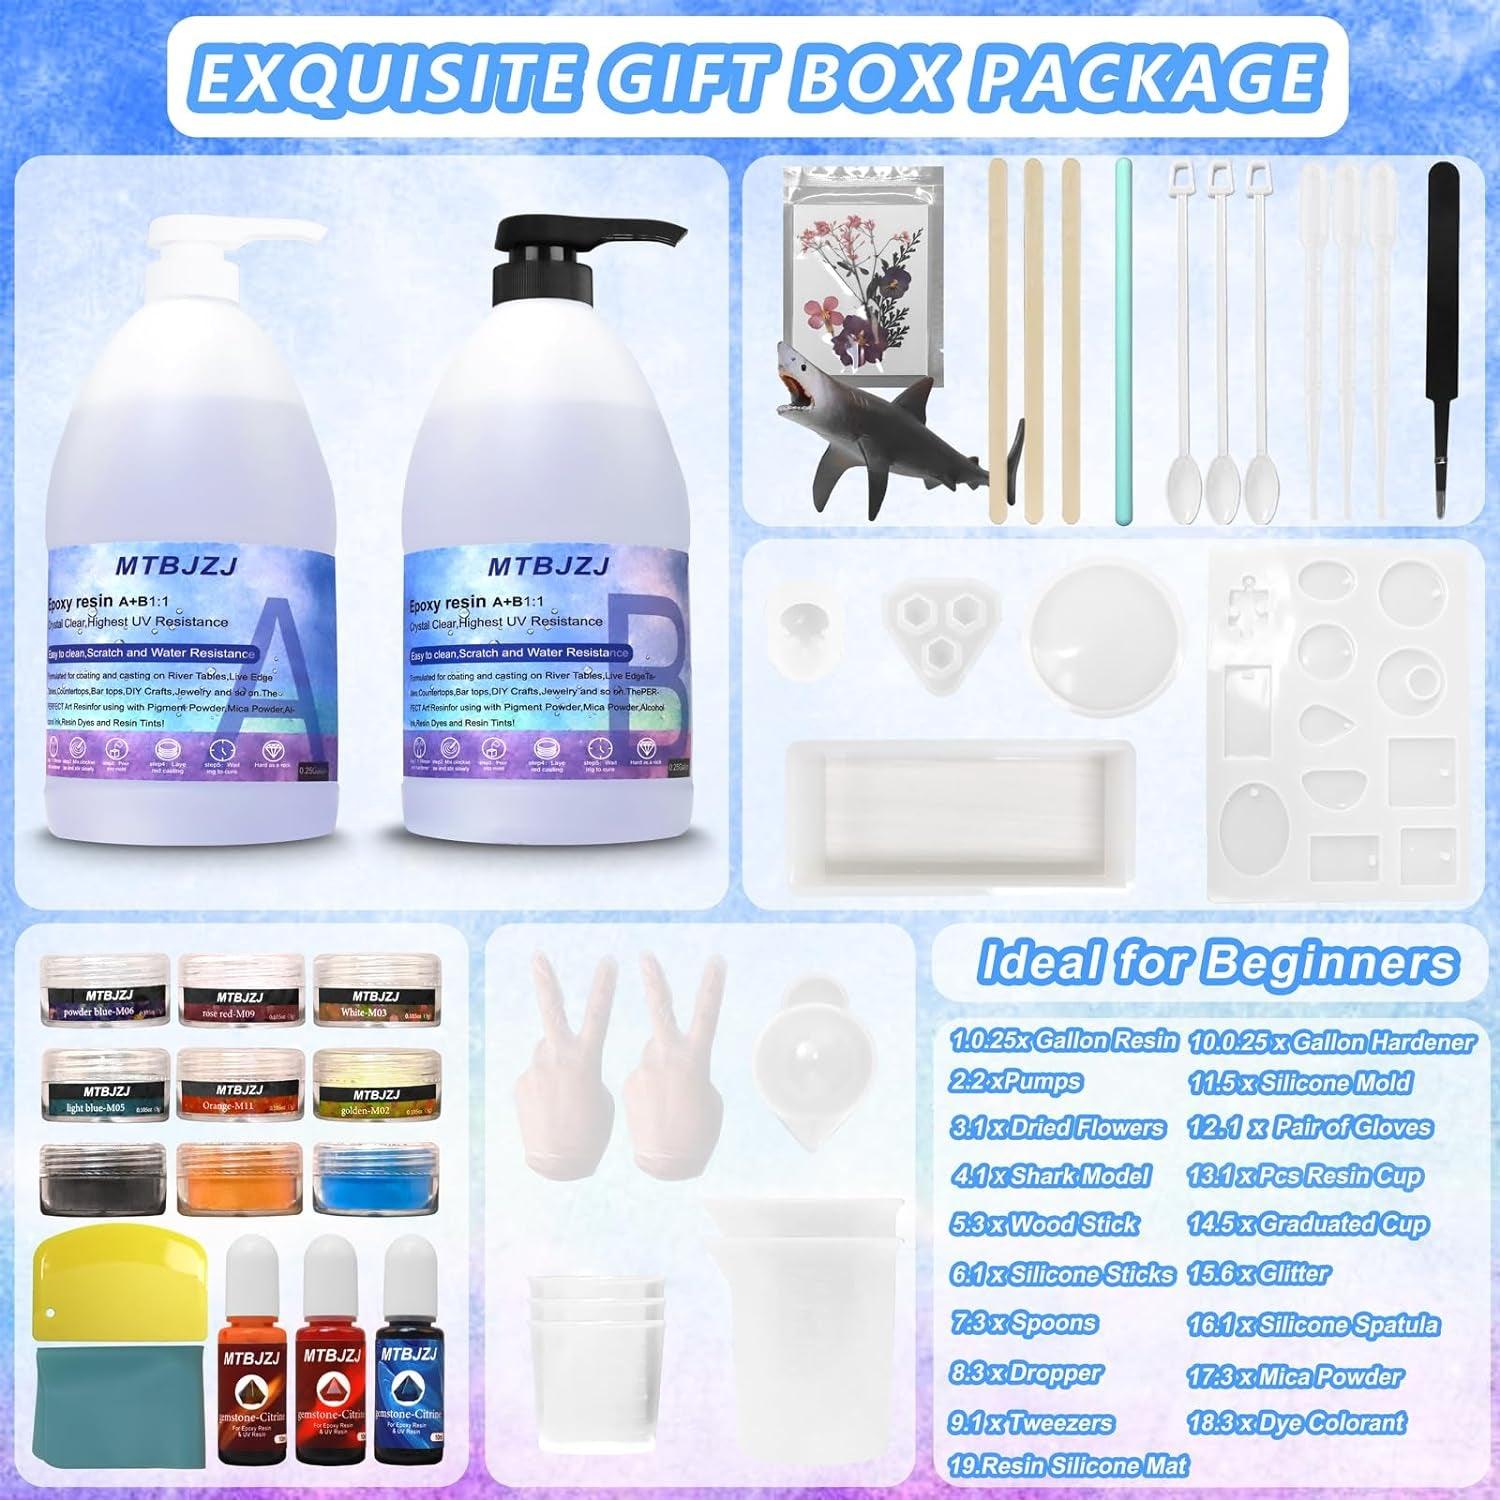 Epoxy Resin Kit for Art & Craft | 1 Gallon(128oz) | Odorless | Crystal  Clear Epoxy Resin | Jewelry, Earrings, Coasters, Casting, Molding, Crafting  